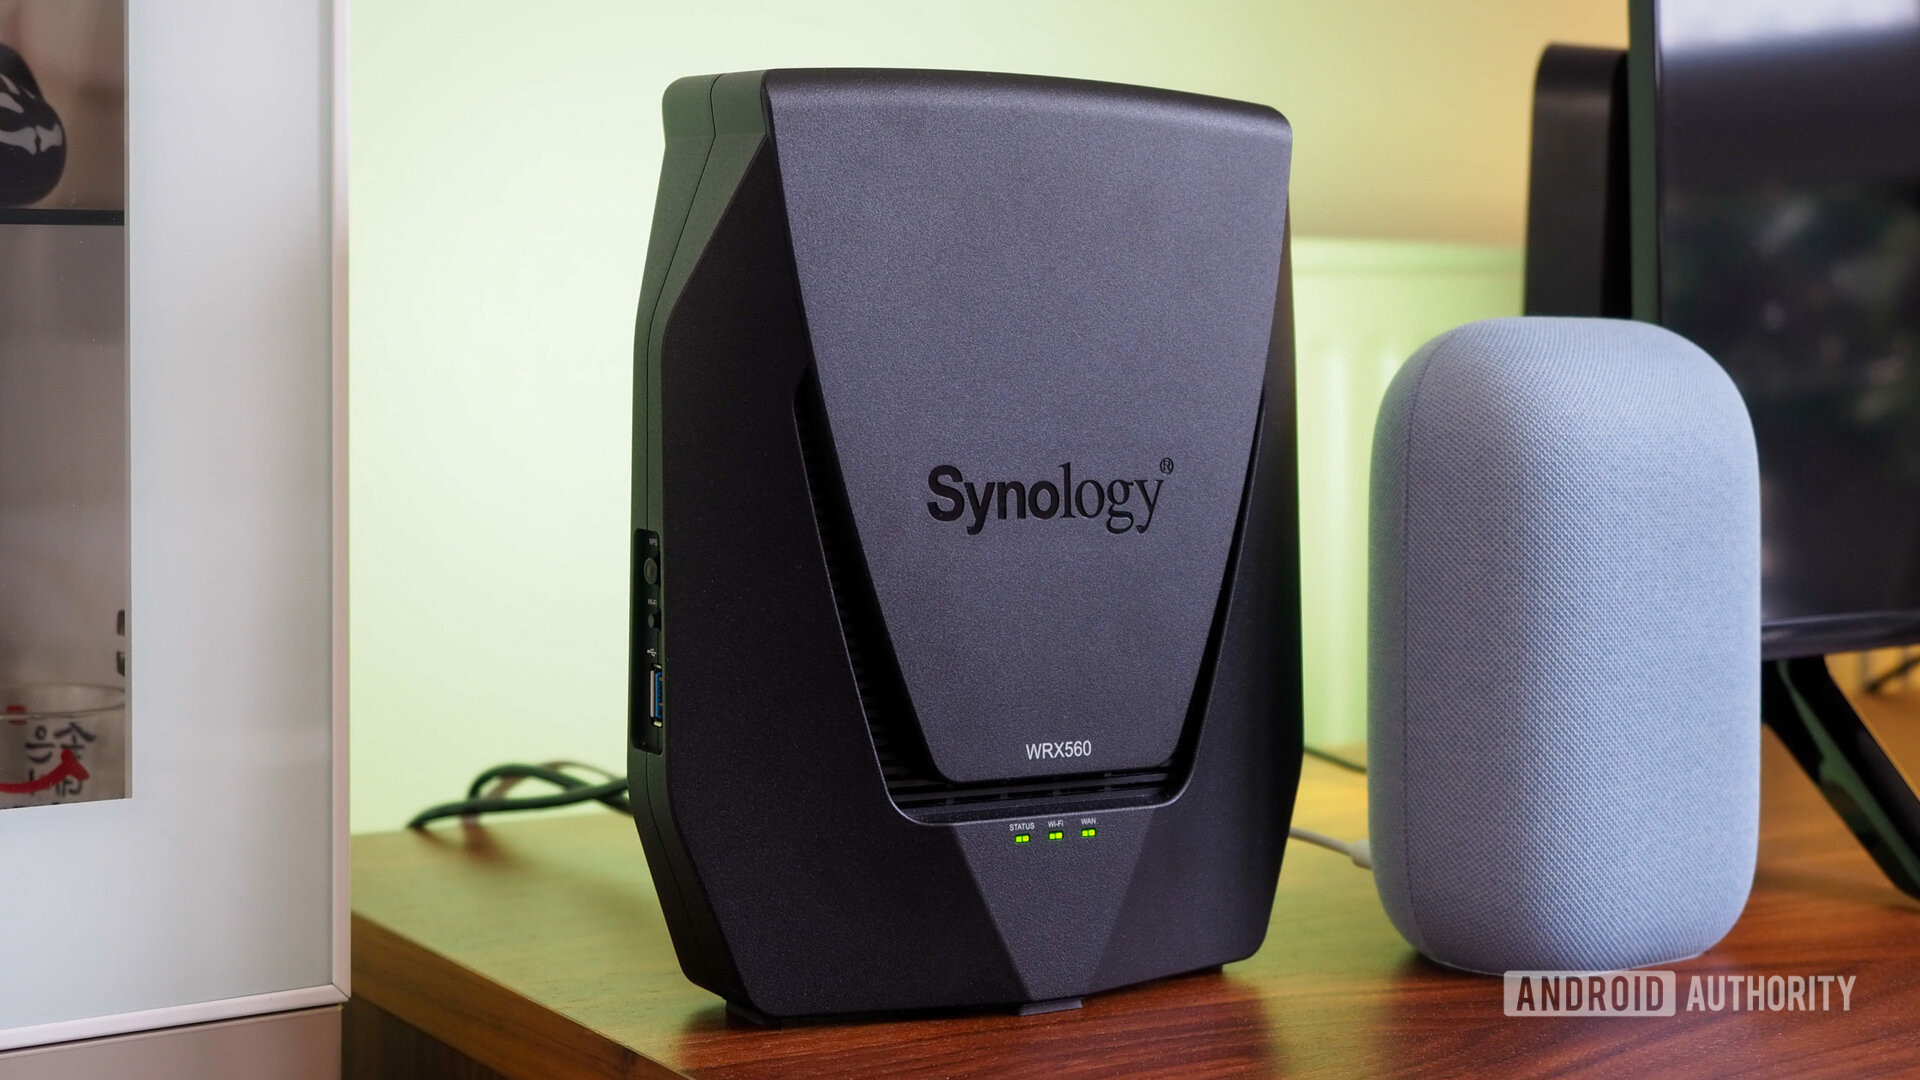 Synology WRX560 router next to Google Nest Audio with a green backlight